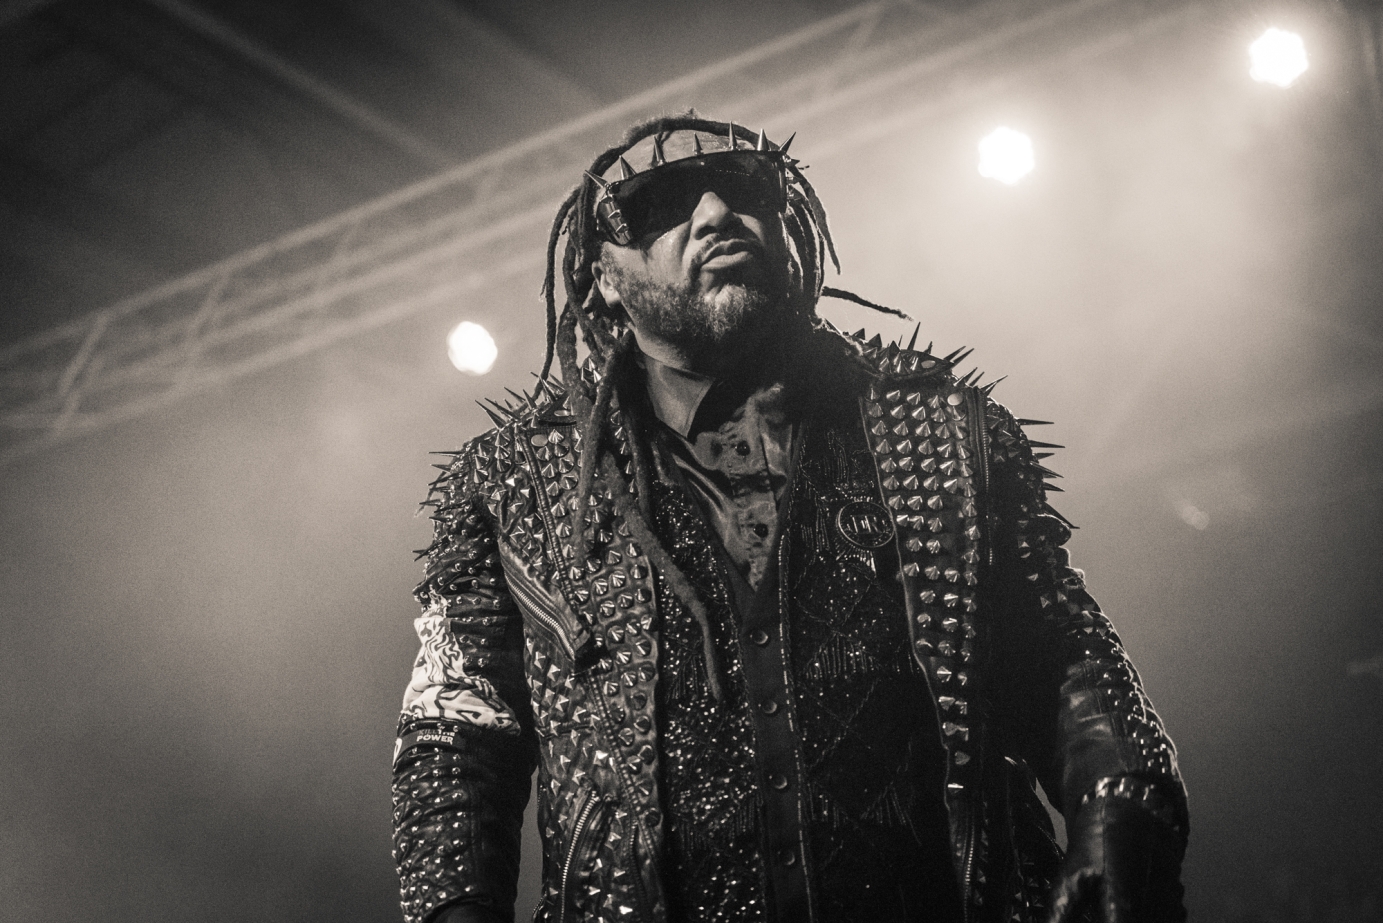 Photography for Skindred by Eleanor Jane